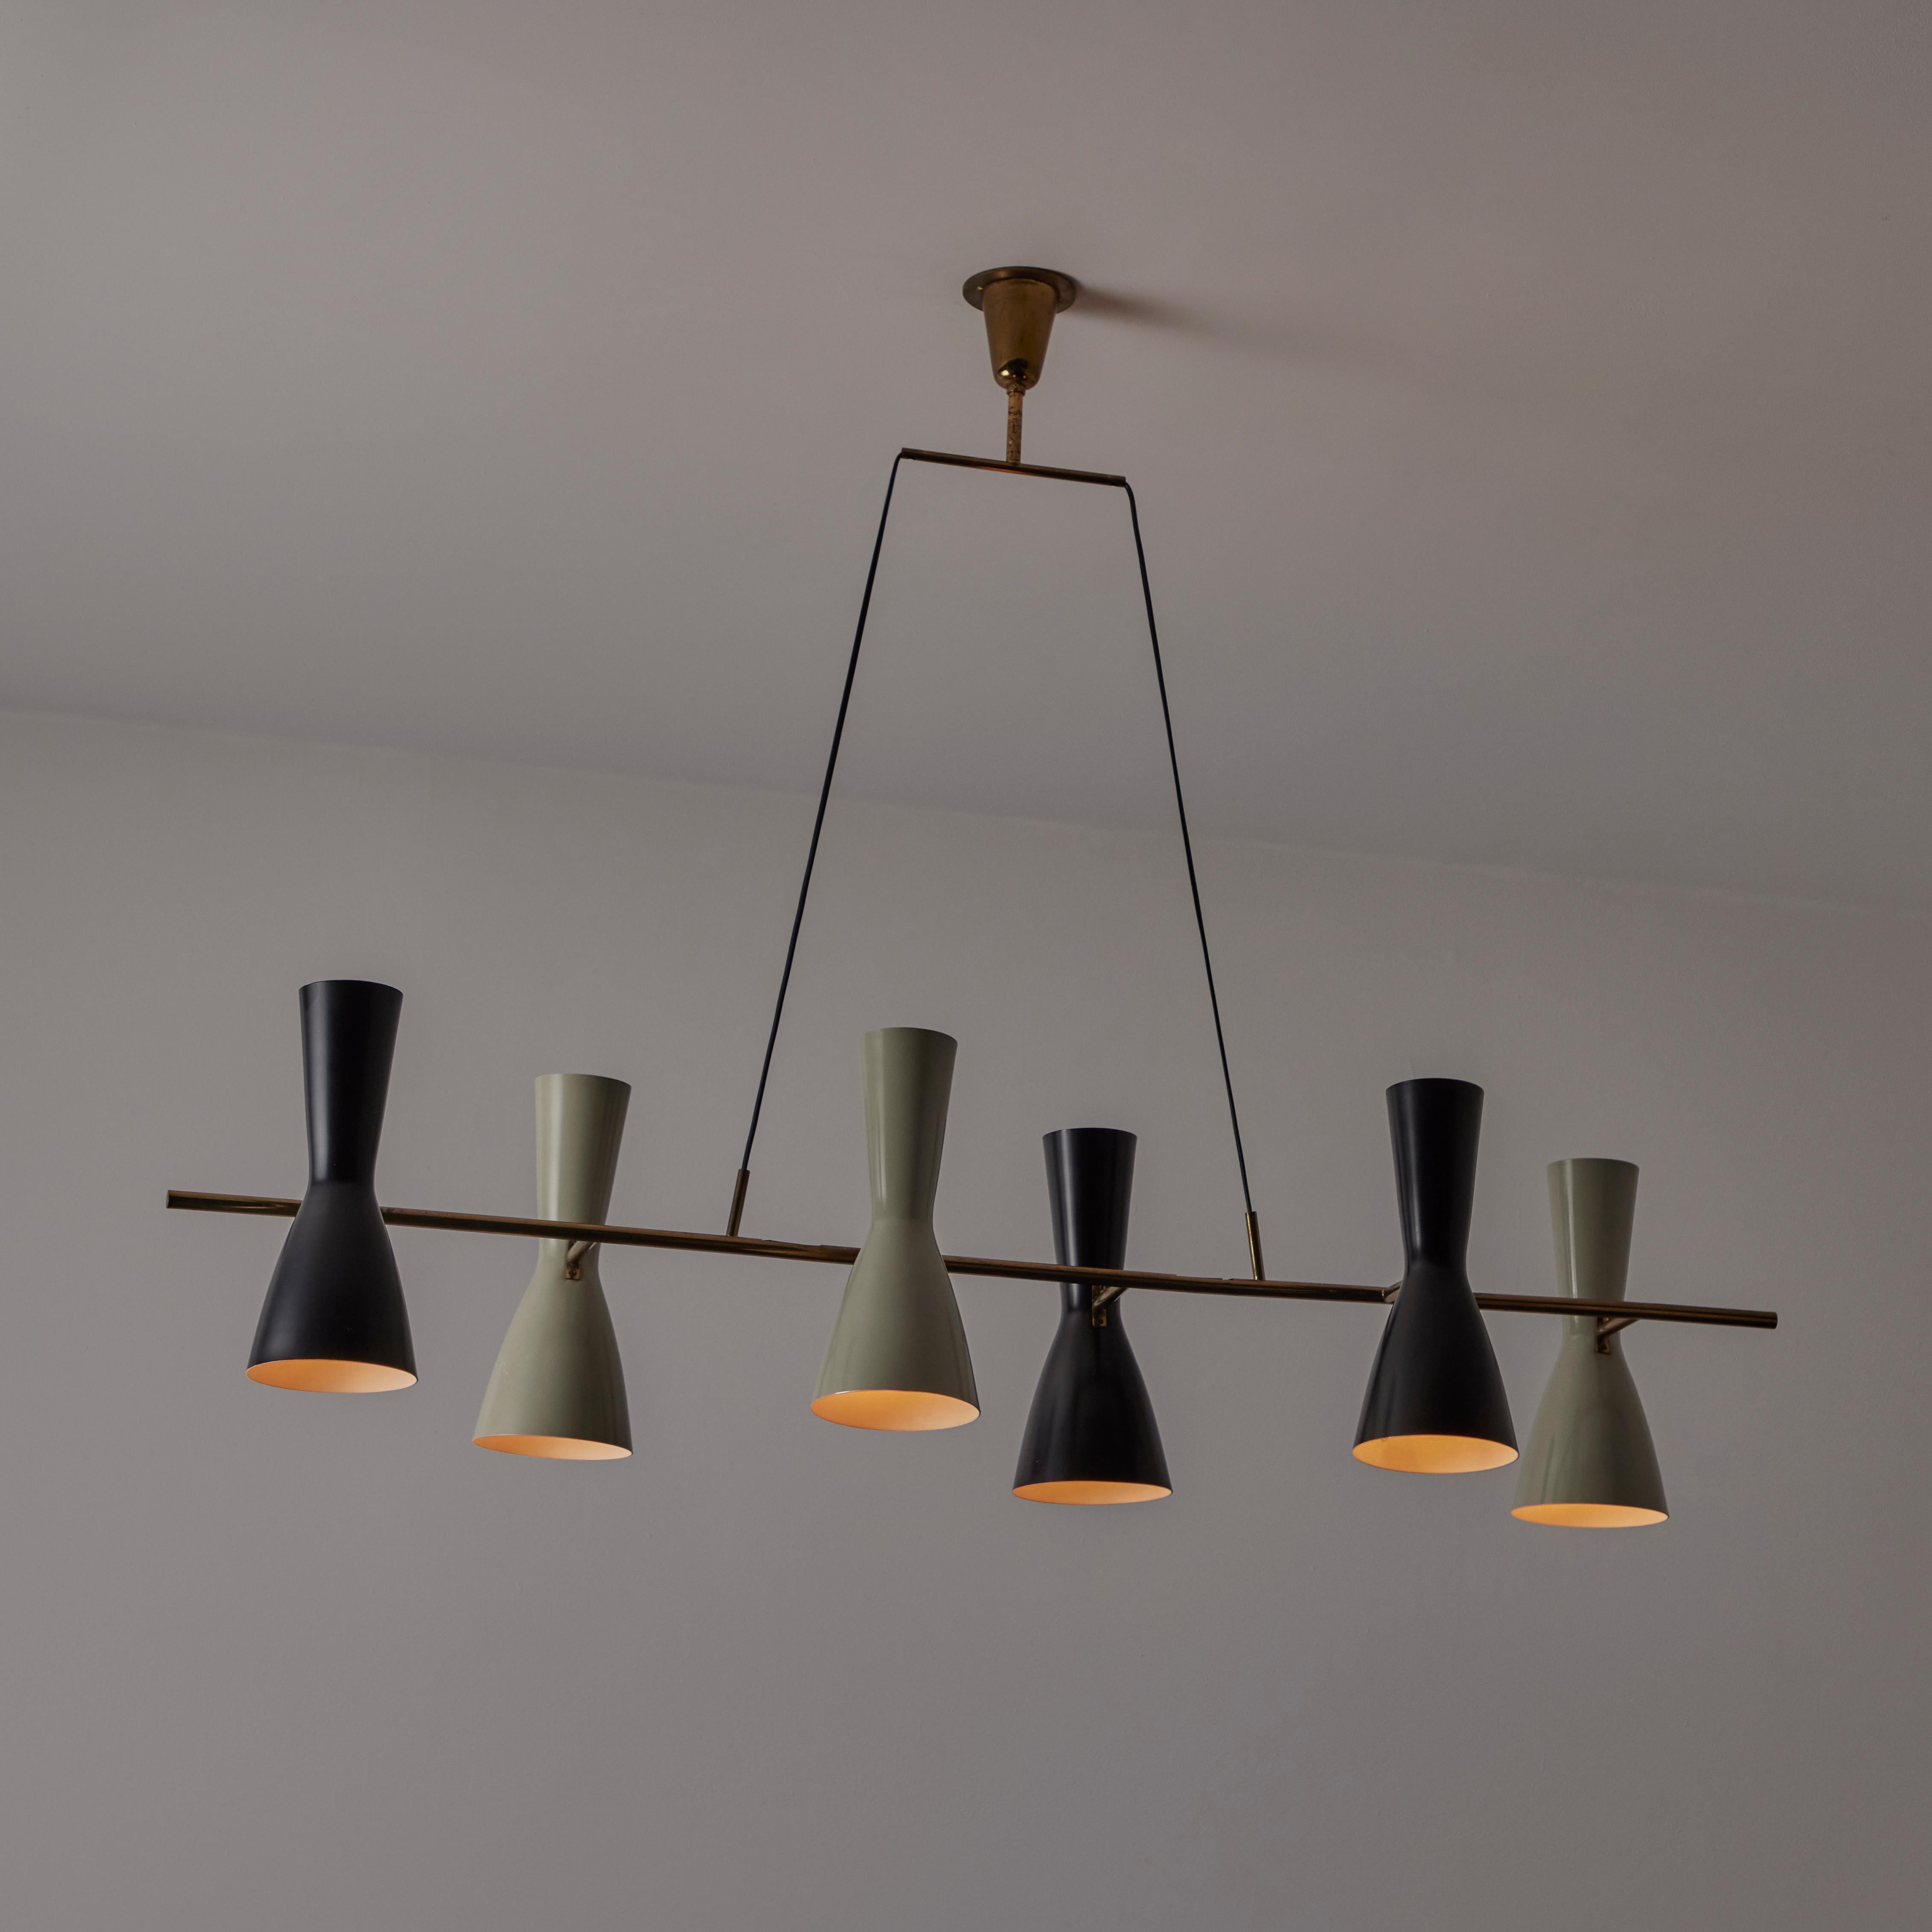 Linear chandelier by Stilnovo. Manufactured in Italy, circa the 1950s. Six double fluted shades run in a sequential pattern down a linear brass suspension rod. The shades are sequenced as two colorways; a greyish olive tone, and a black tone. Shades